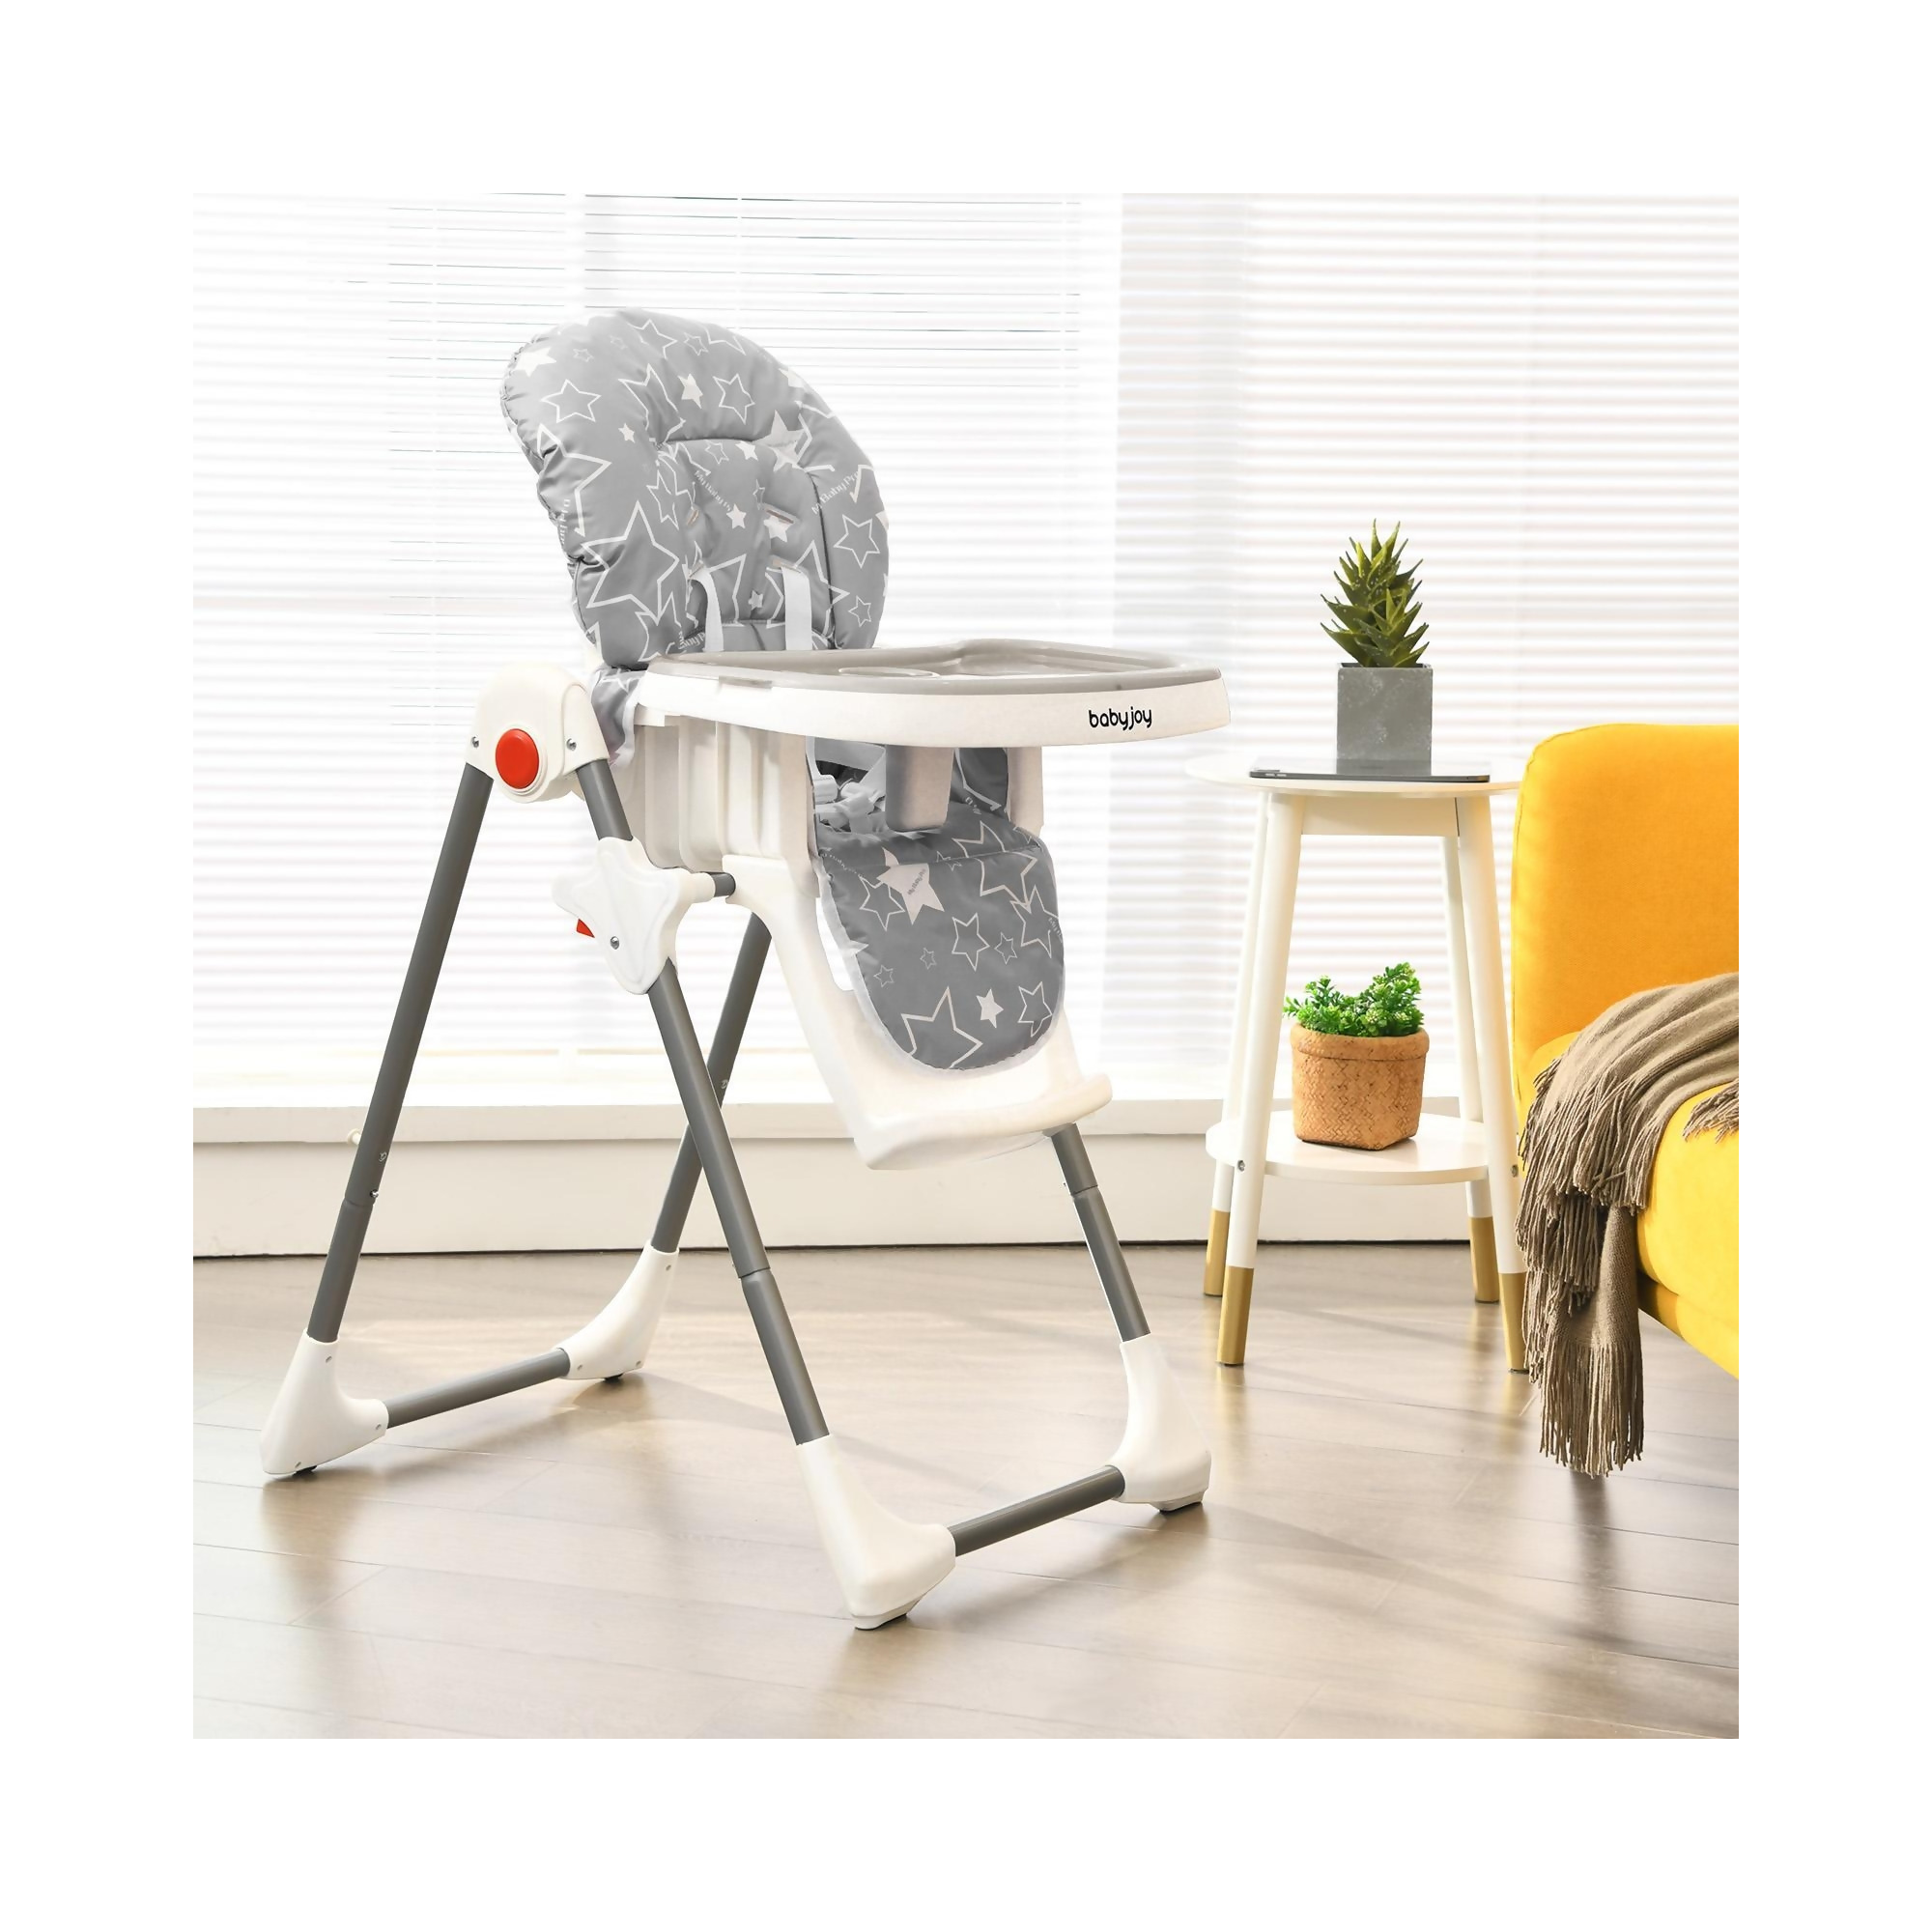 Babyjoy Folding Baby High Chair Dining Chair w/ 6-Level Height Adjustment Gray